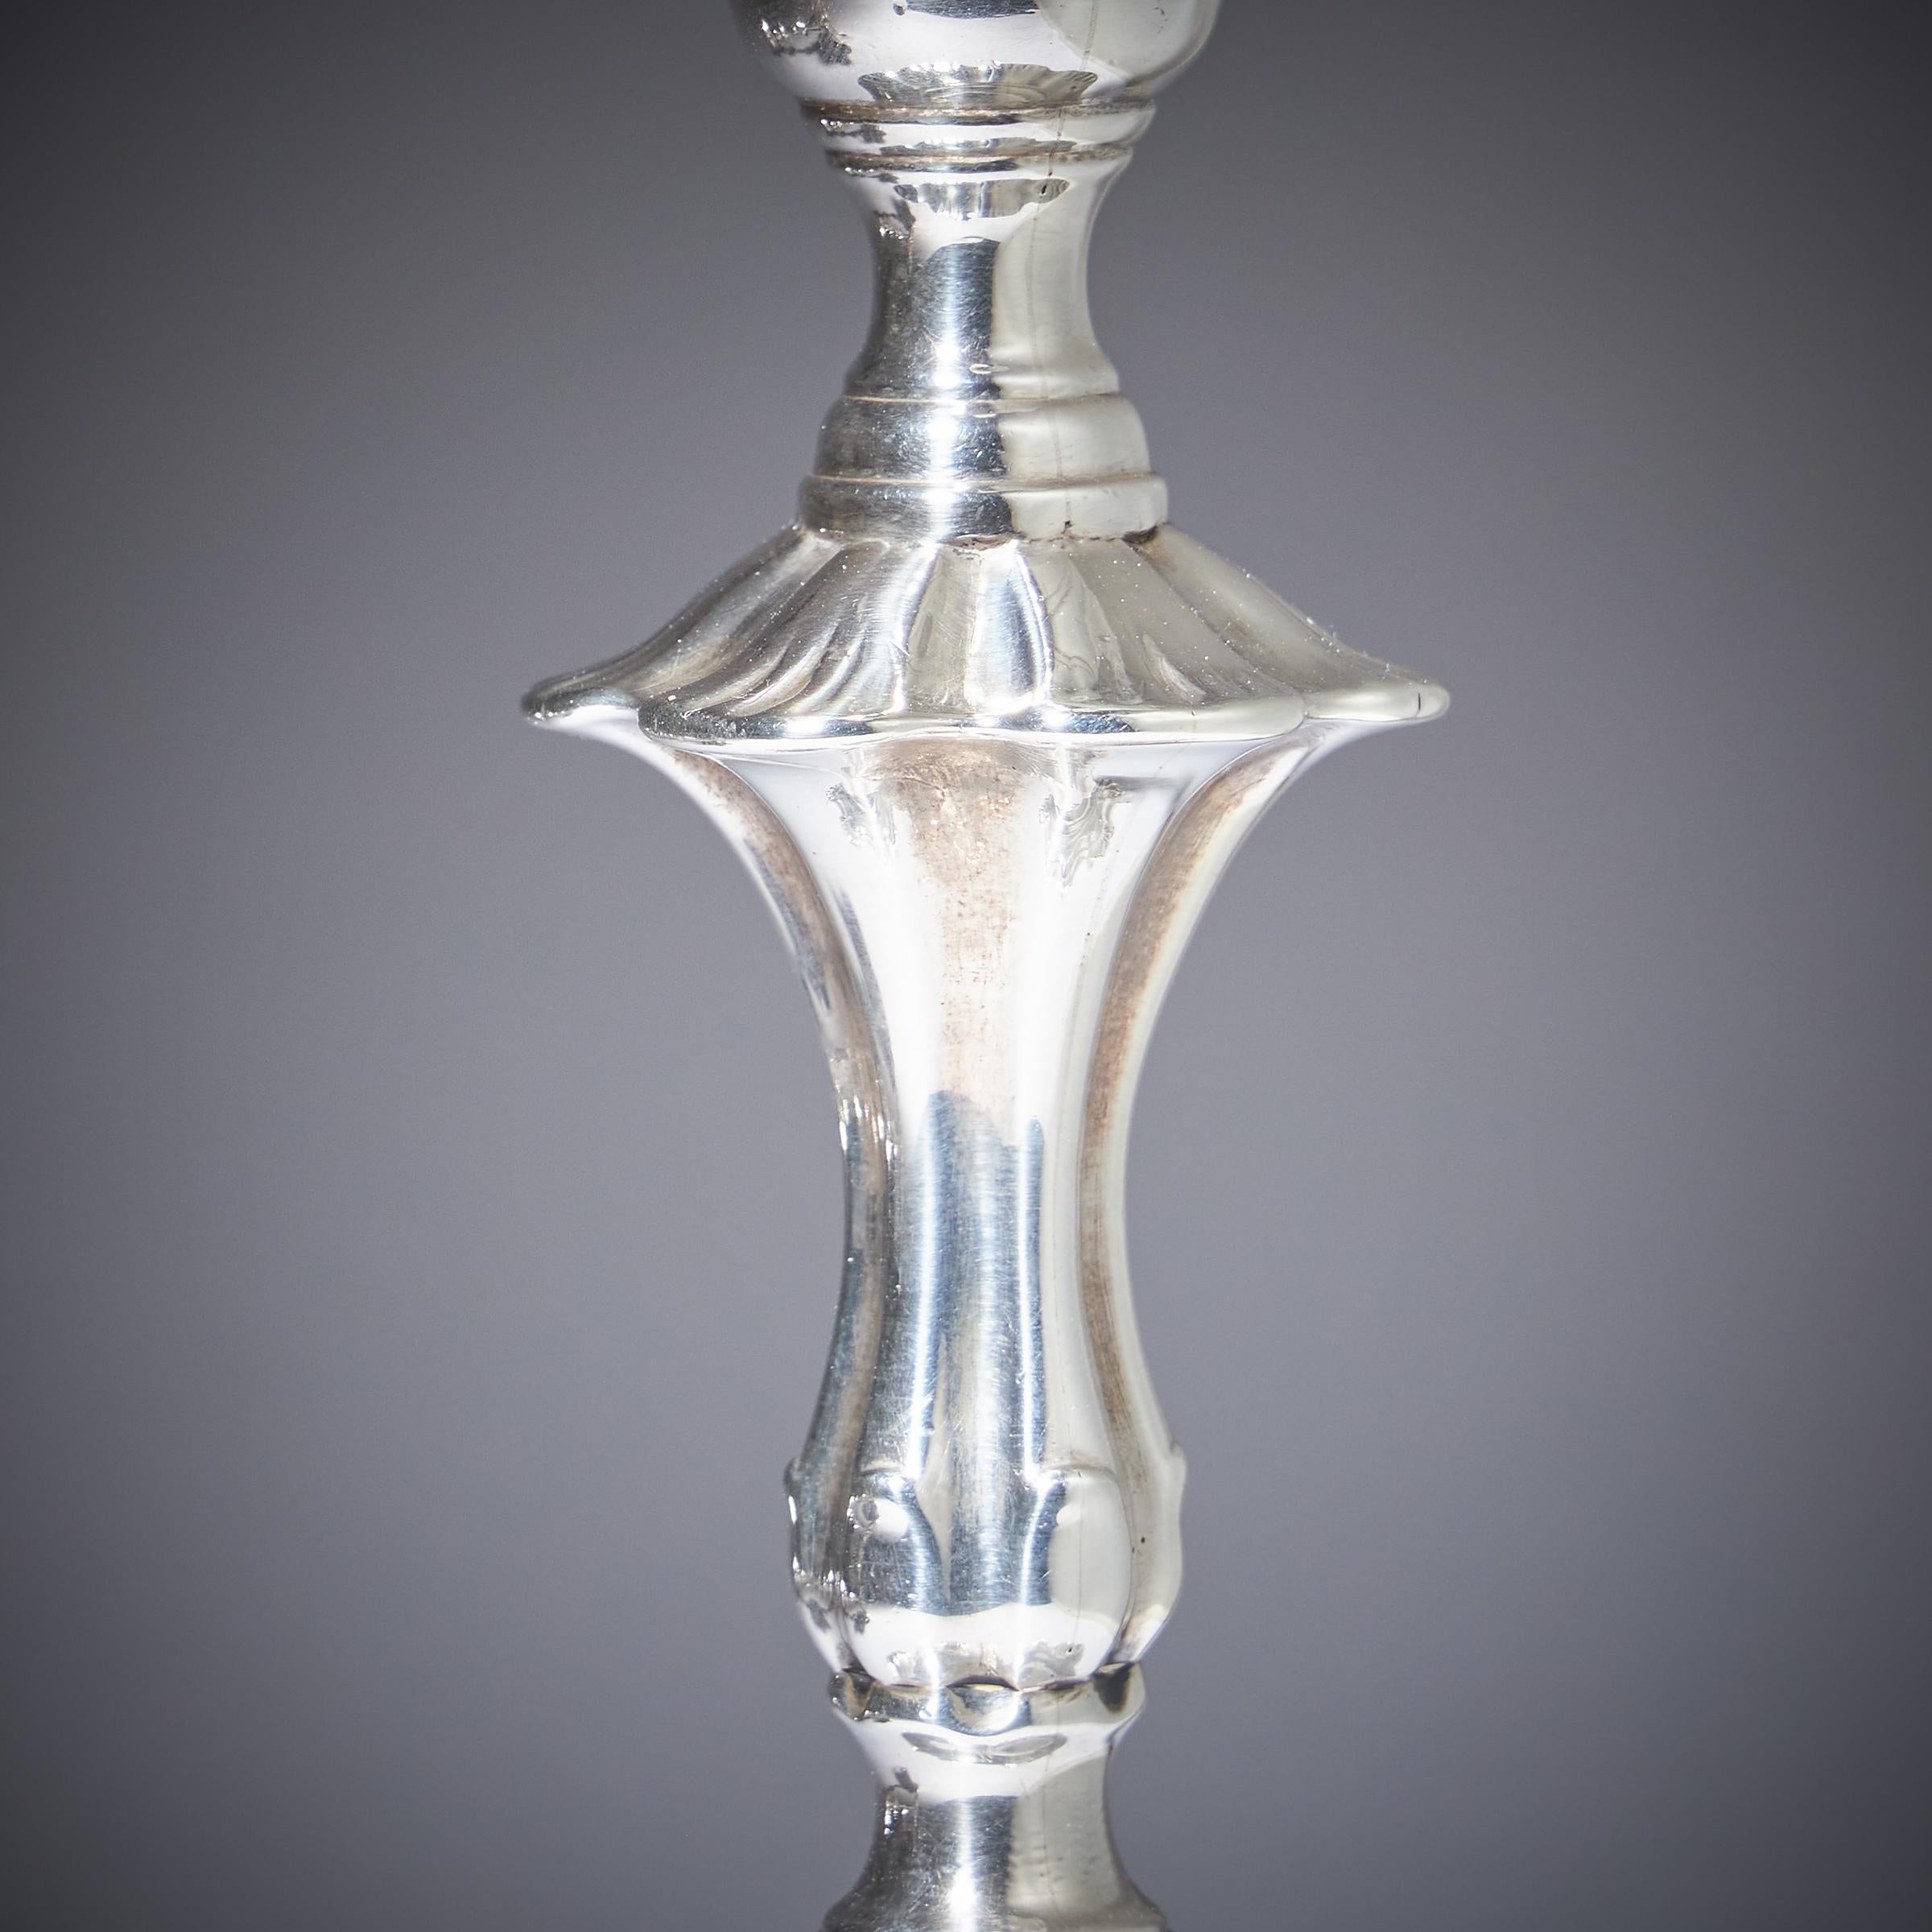 A Pair of 18th Century George II Silver Candlesticks by John Cafe, London 1751 11